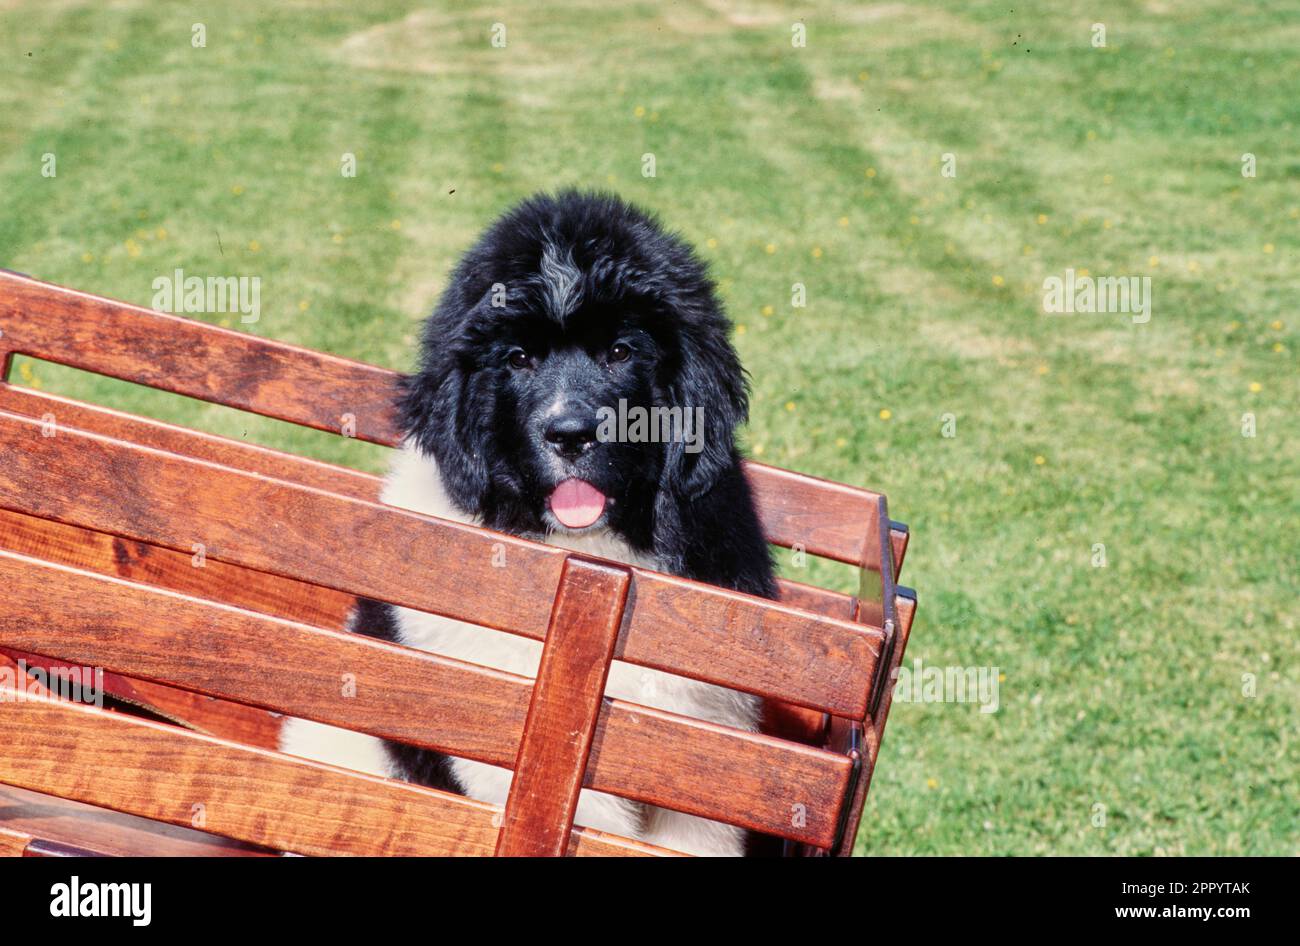 Newfoundland puppy sitting in back of wooden cart outside in yard Stock Photo